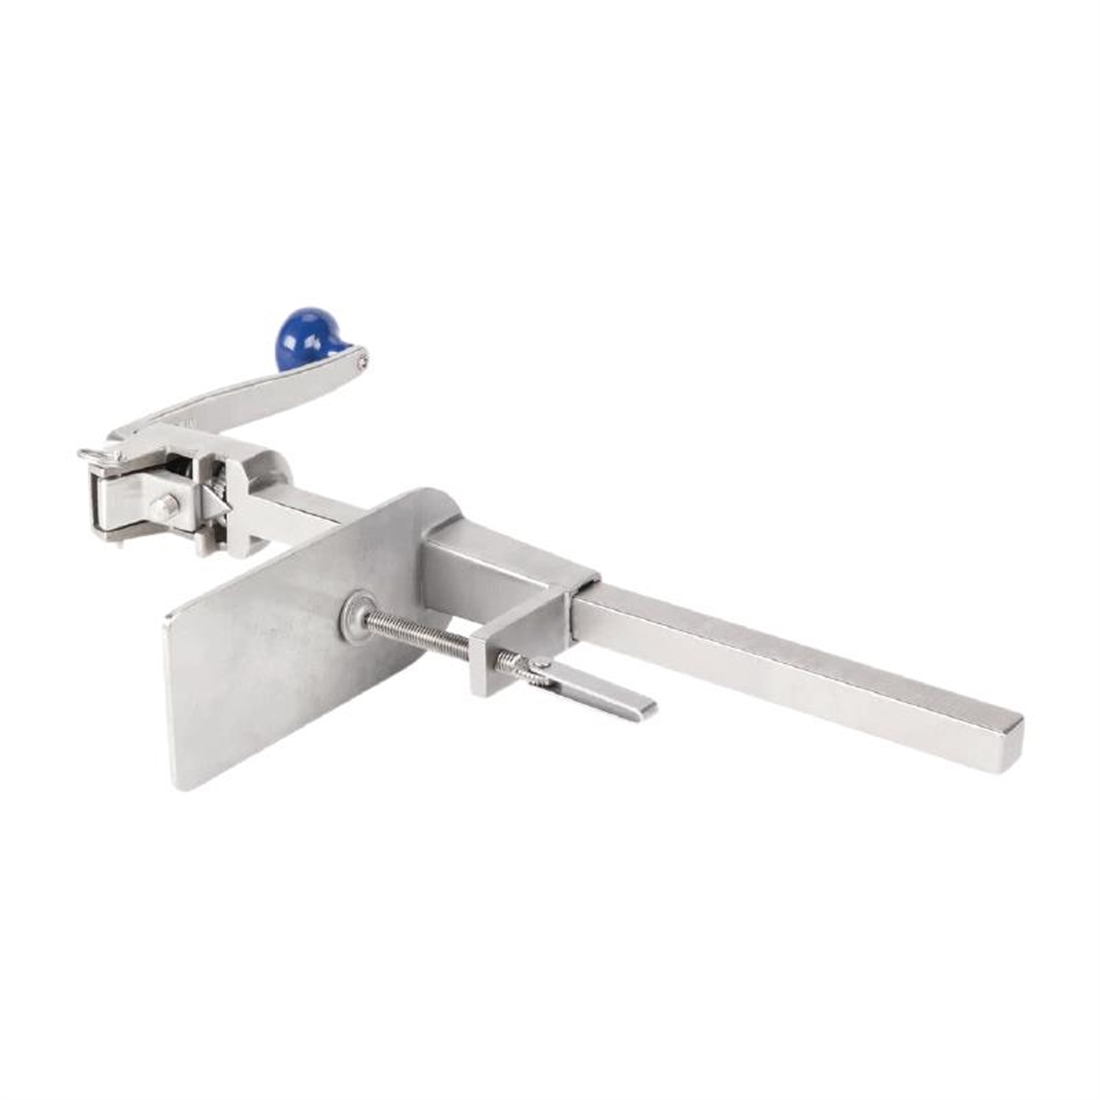 Edlund S11 Bench Can Opener 16"